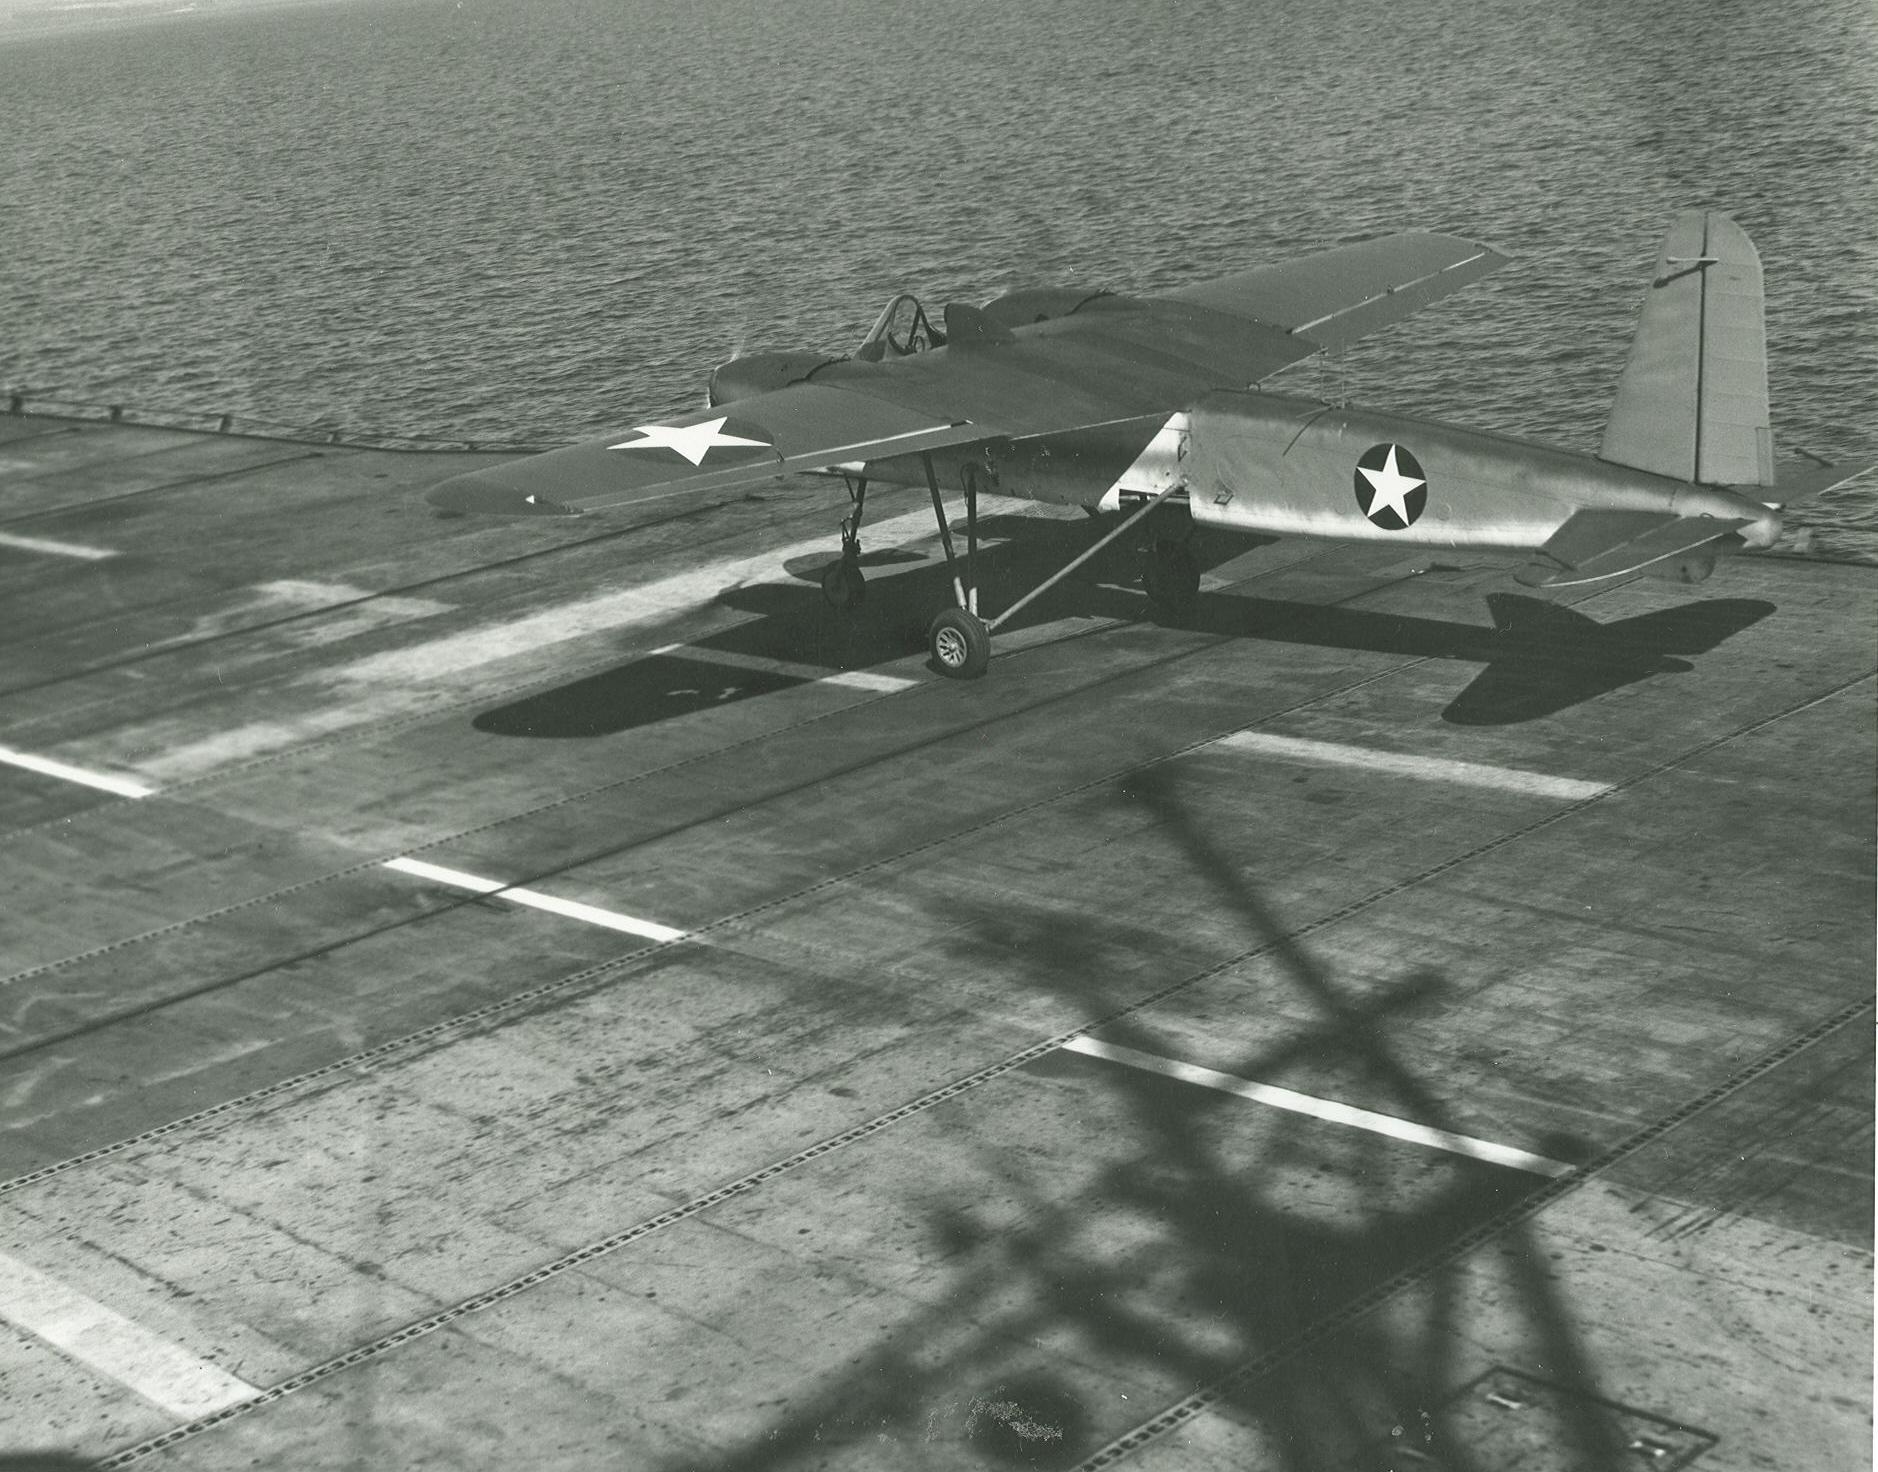 US Navy TDN-1 drone test from the decks of the training carrier USS Sable while steaming in reverse in Grand Traverse Bay, Michigan, United States, 10 Aug 1943. This particular test was unsuccessful. Photo 2 of 4.